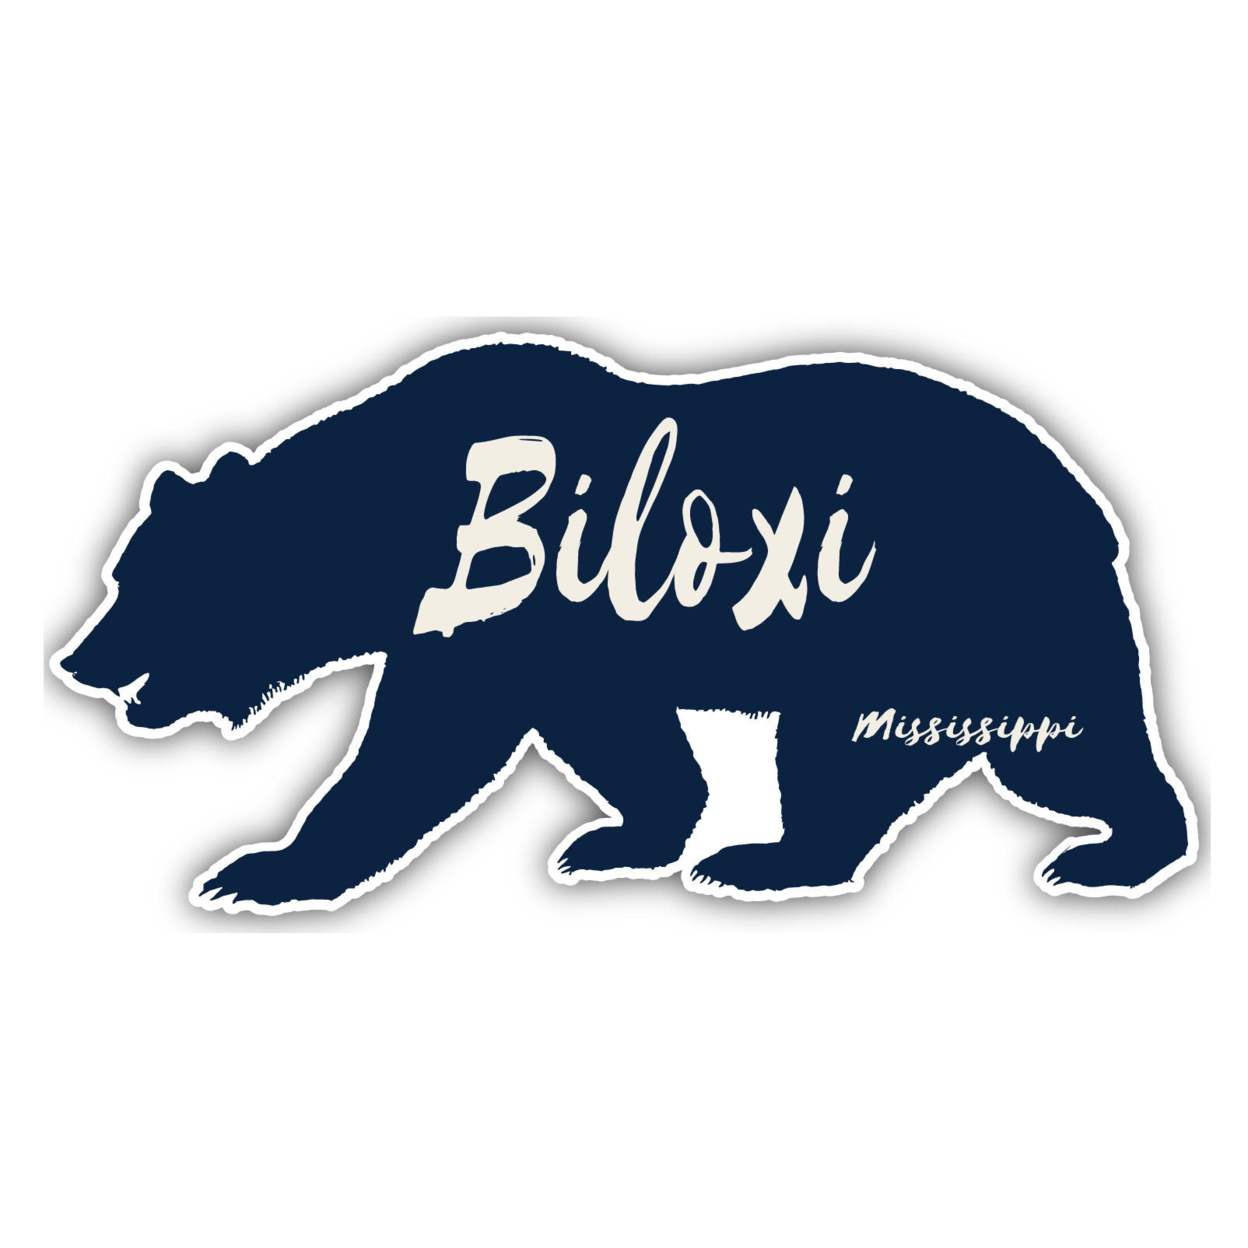 Biloxi Mississippi Souvenir Decorative Stickers (Choose Theme And Size) - 4-Pack, 8-Inch, Bear